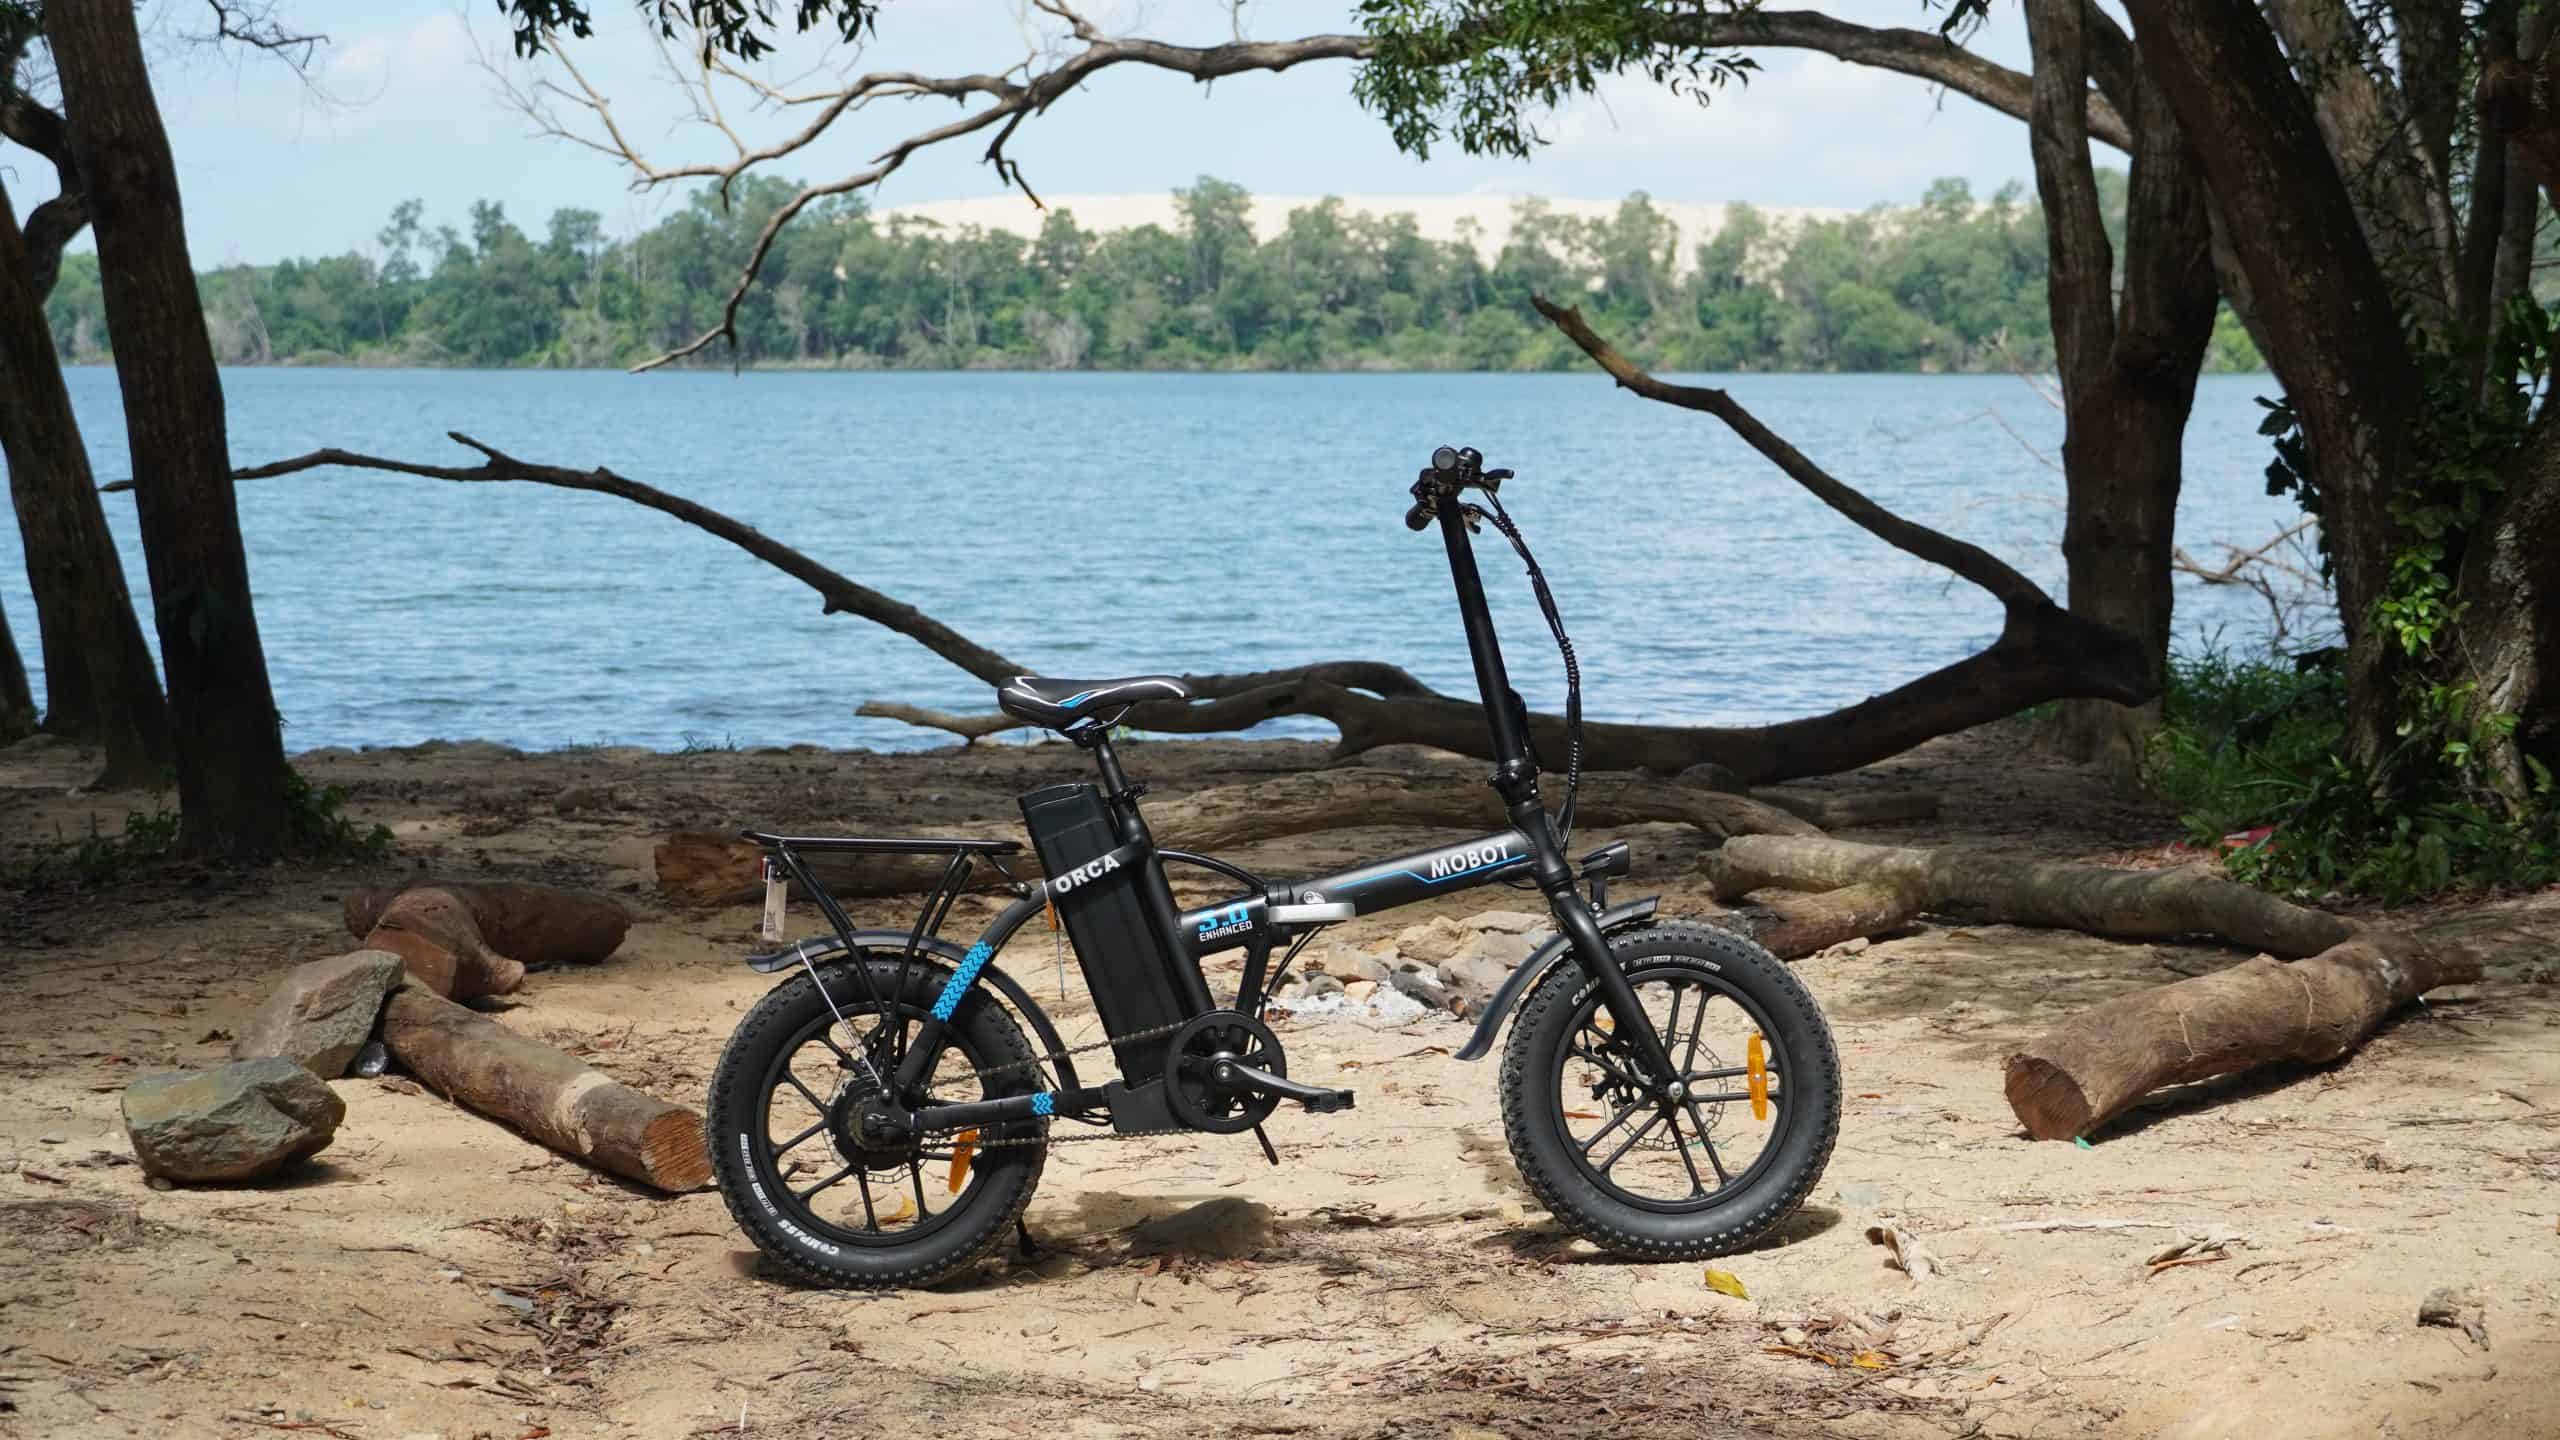 DSC06803 scaled - E-bike Laws in Singapore: Is it Time for a Review?